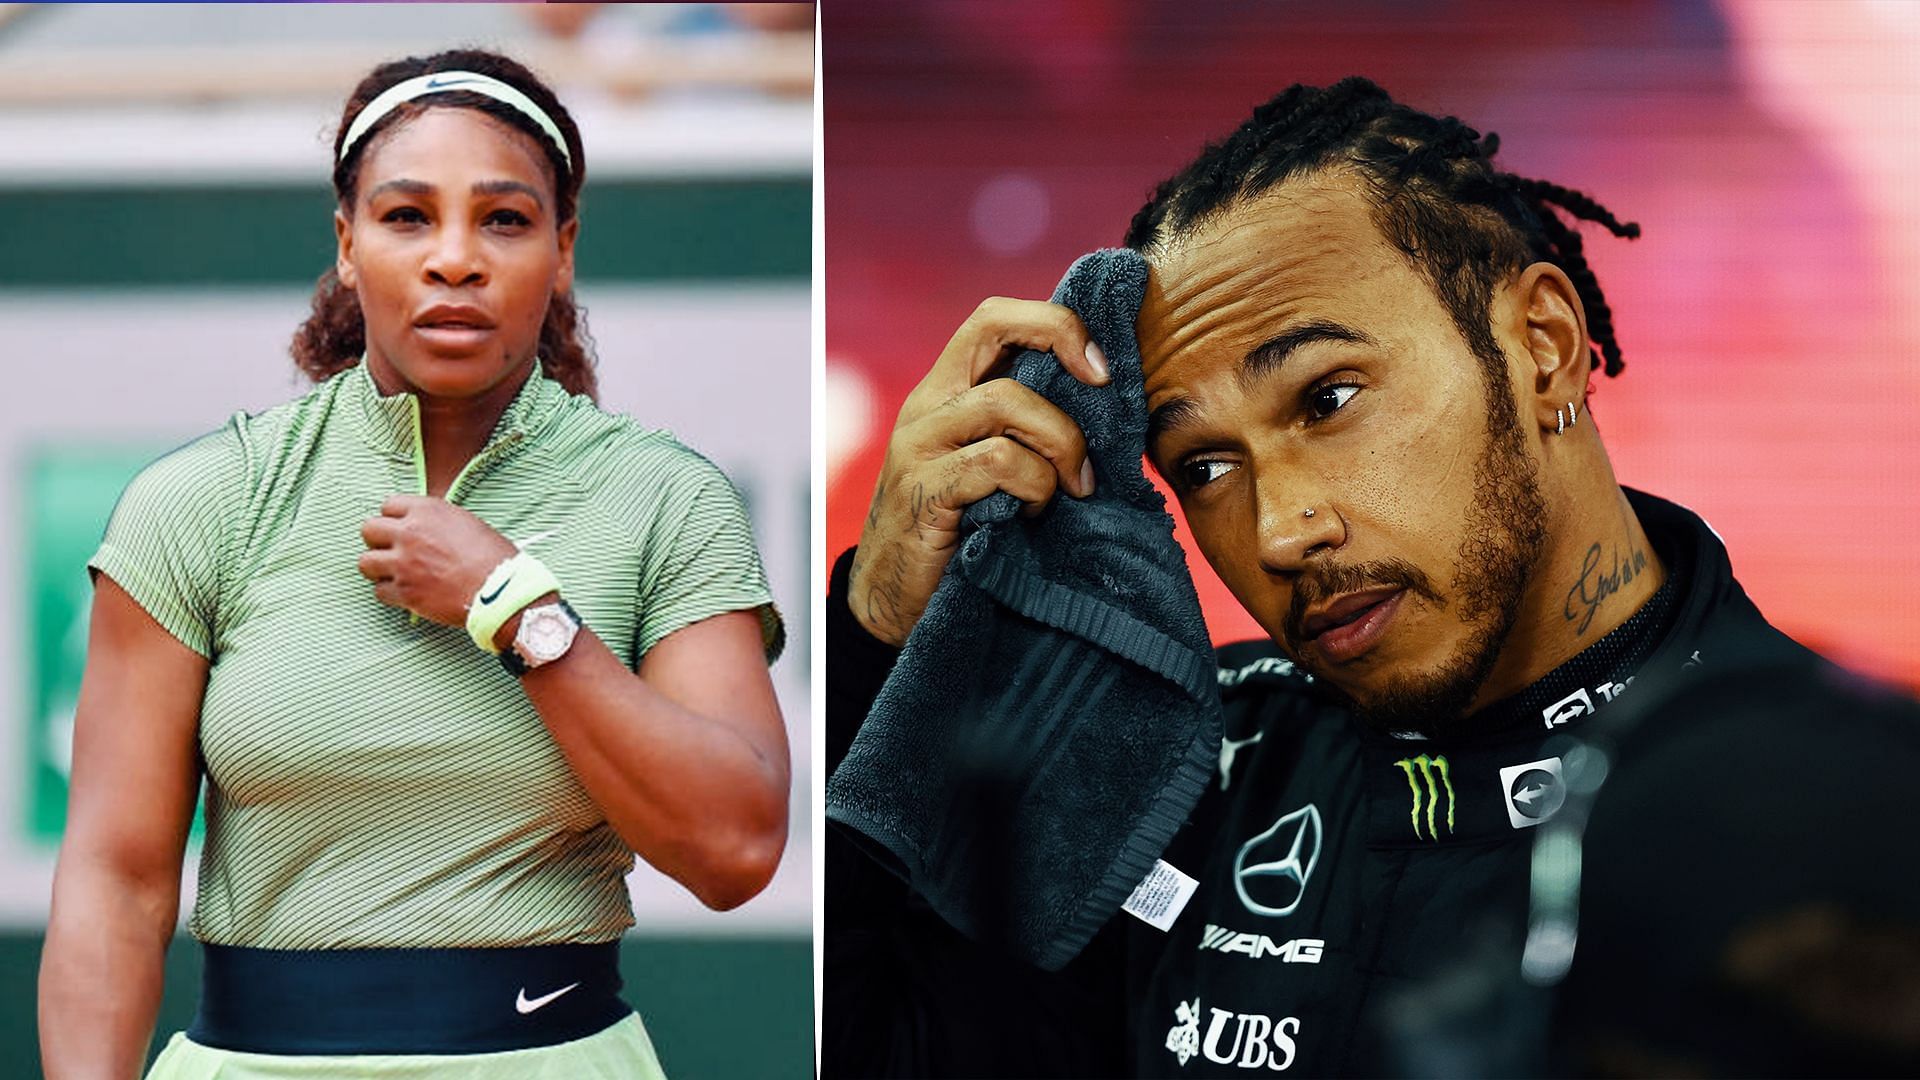 Fans react to Serena Williams